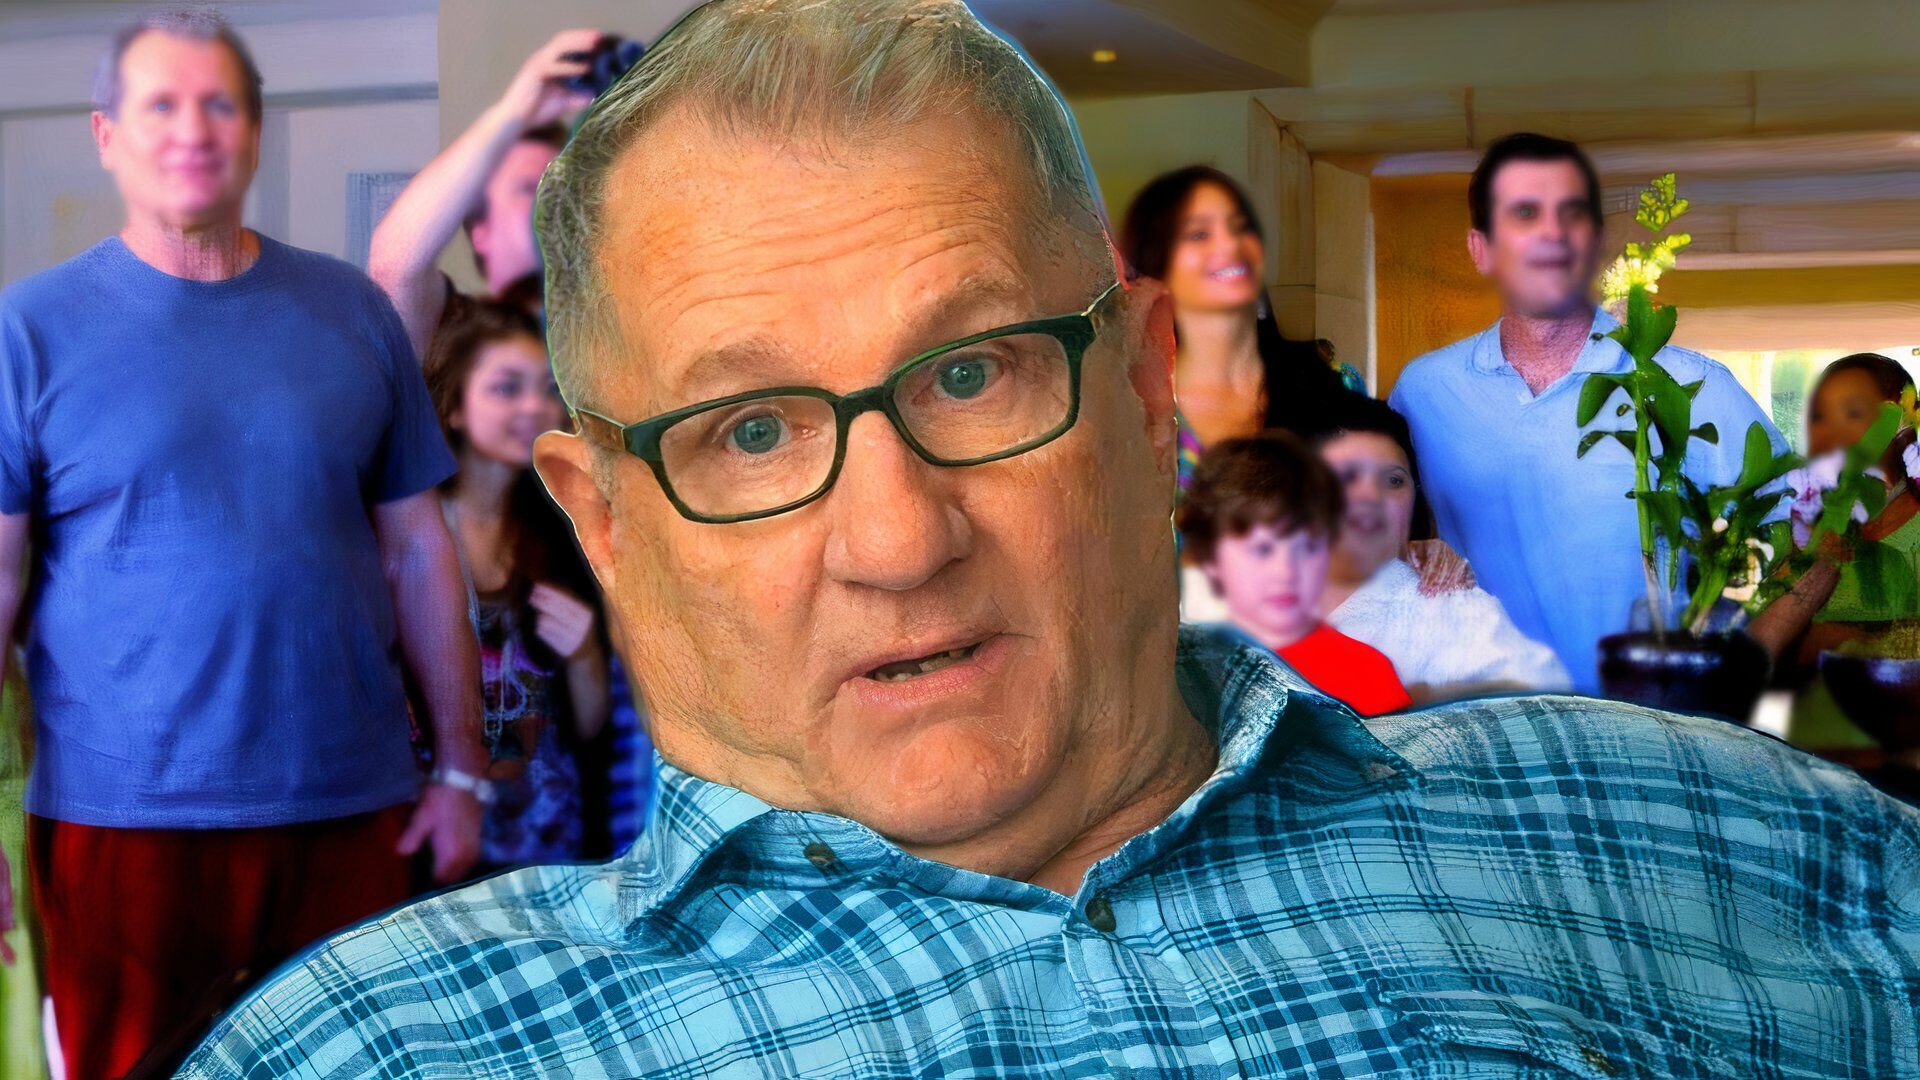 Ed O'Neill as his Modern Family character with scene from show